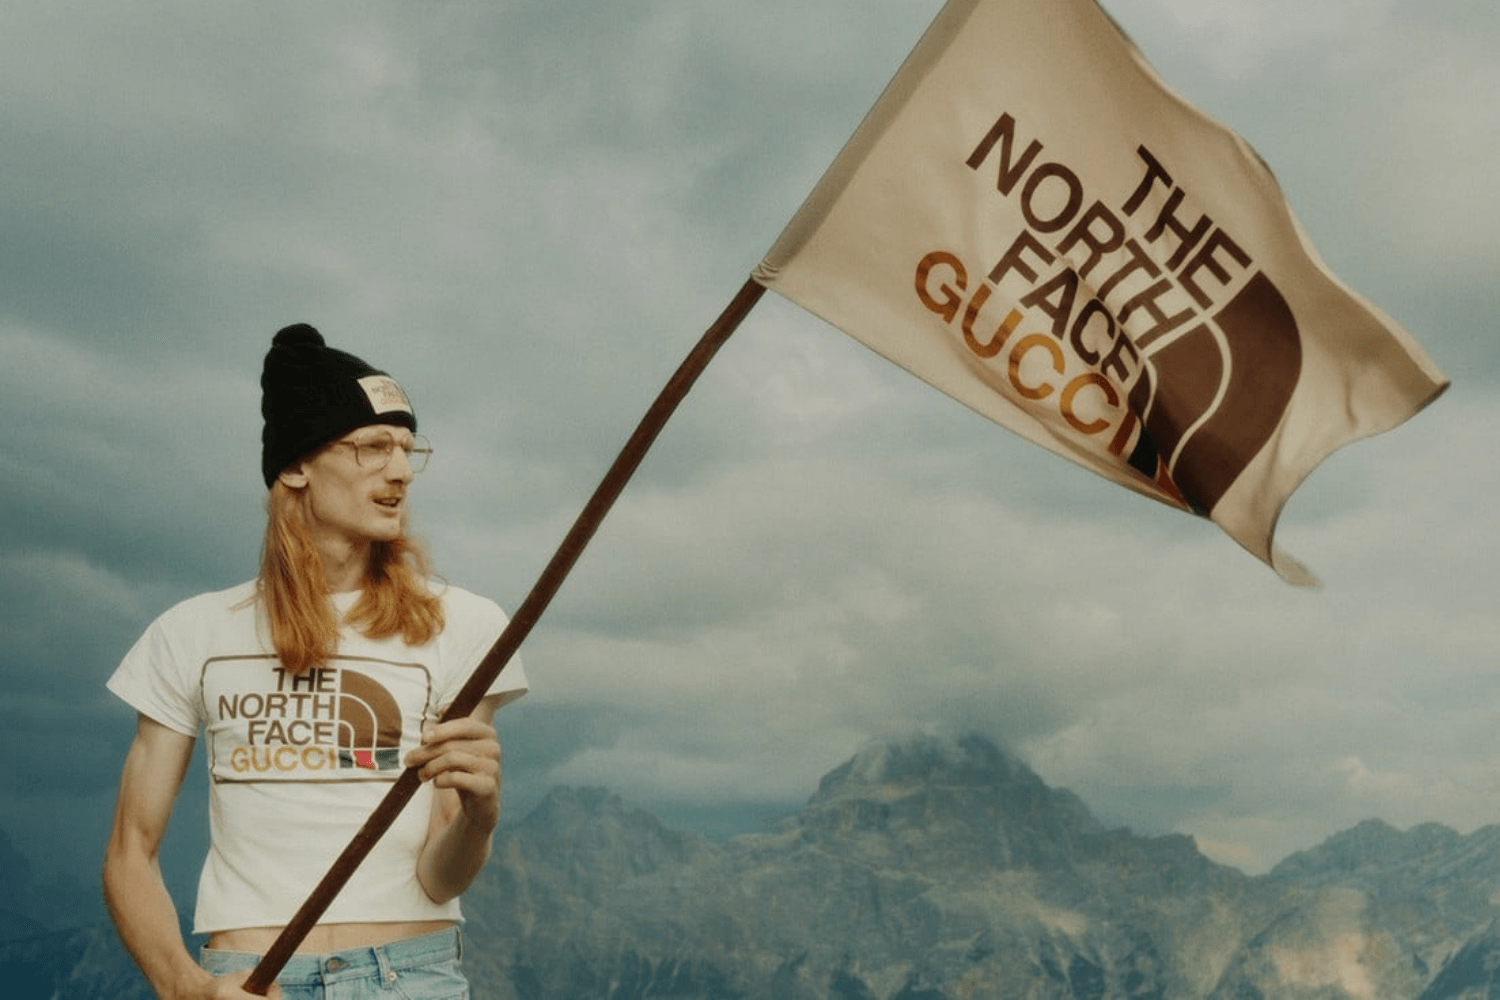 Gucci and The North Face collaborate again